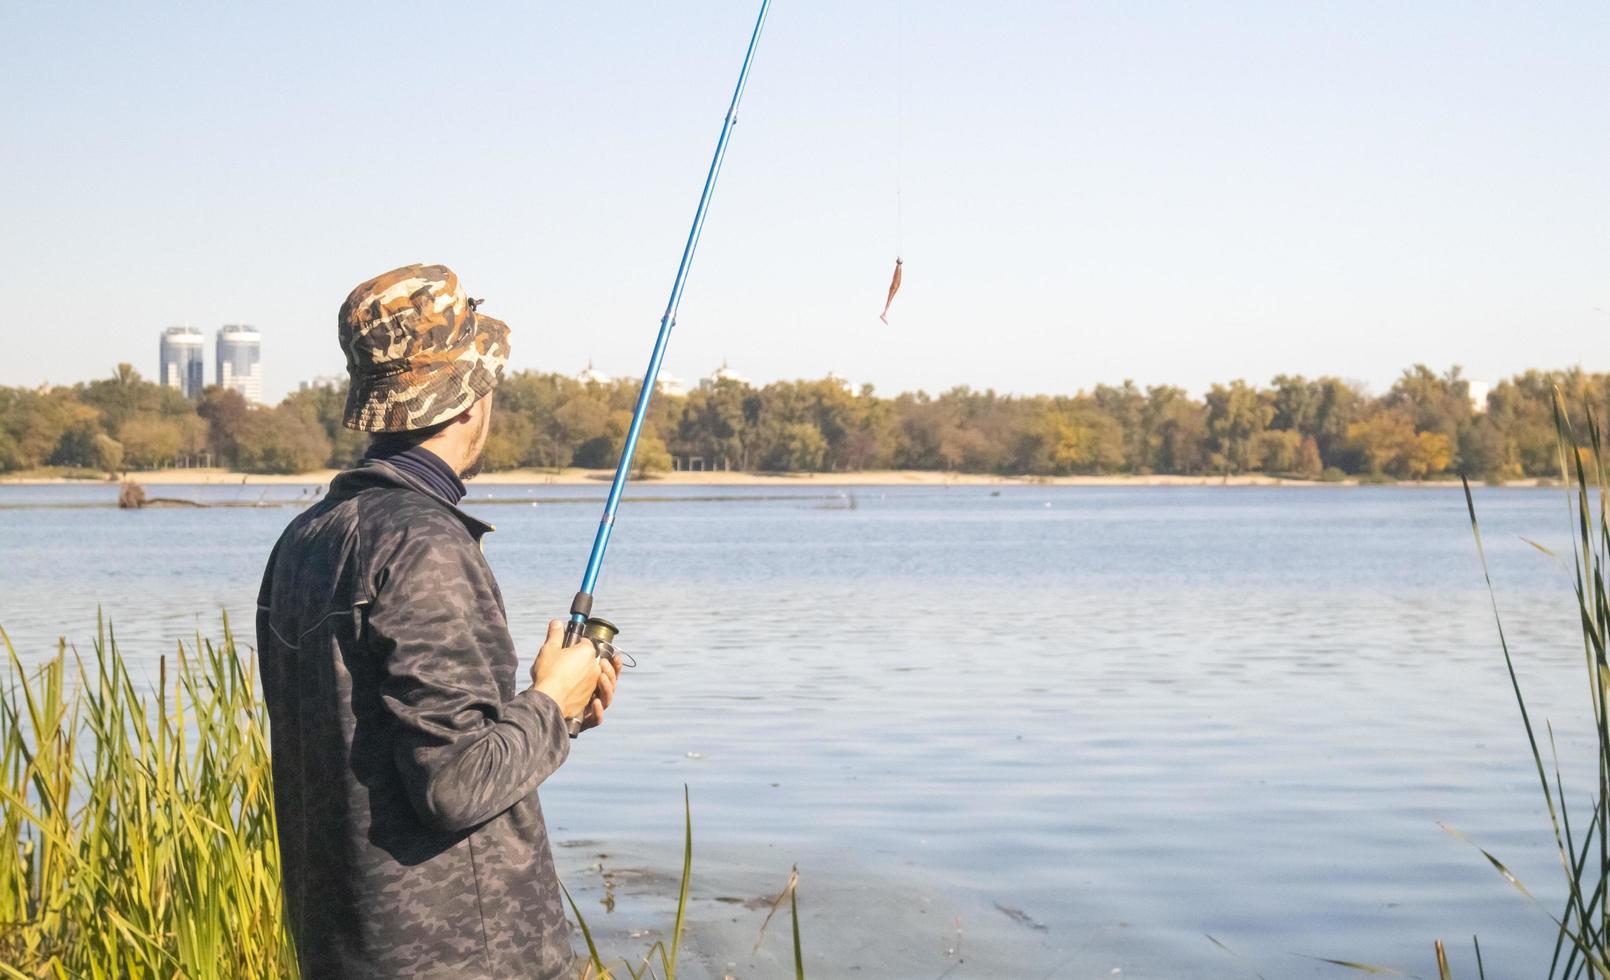 A male fisherman threw a spinning rod into a lake or river on a